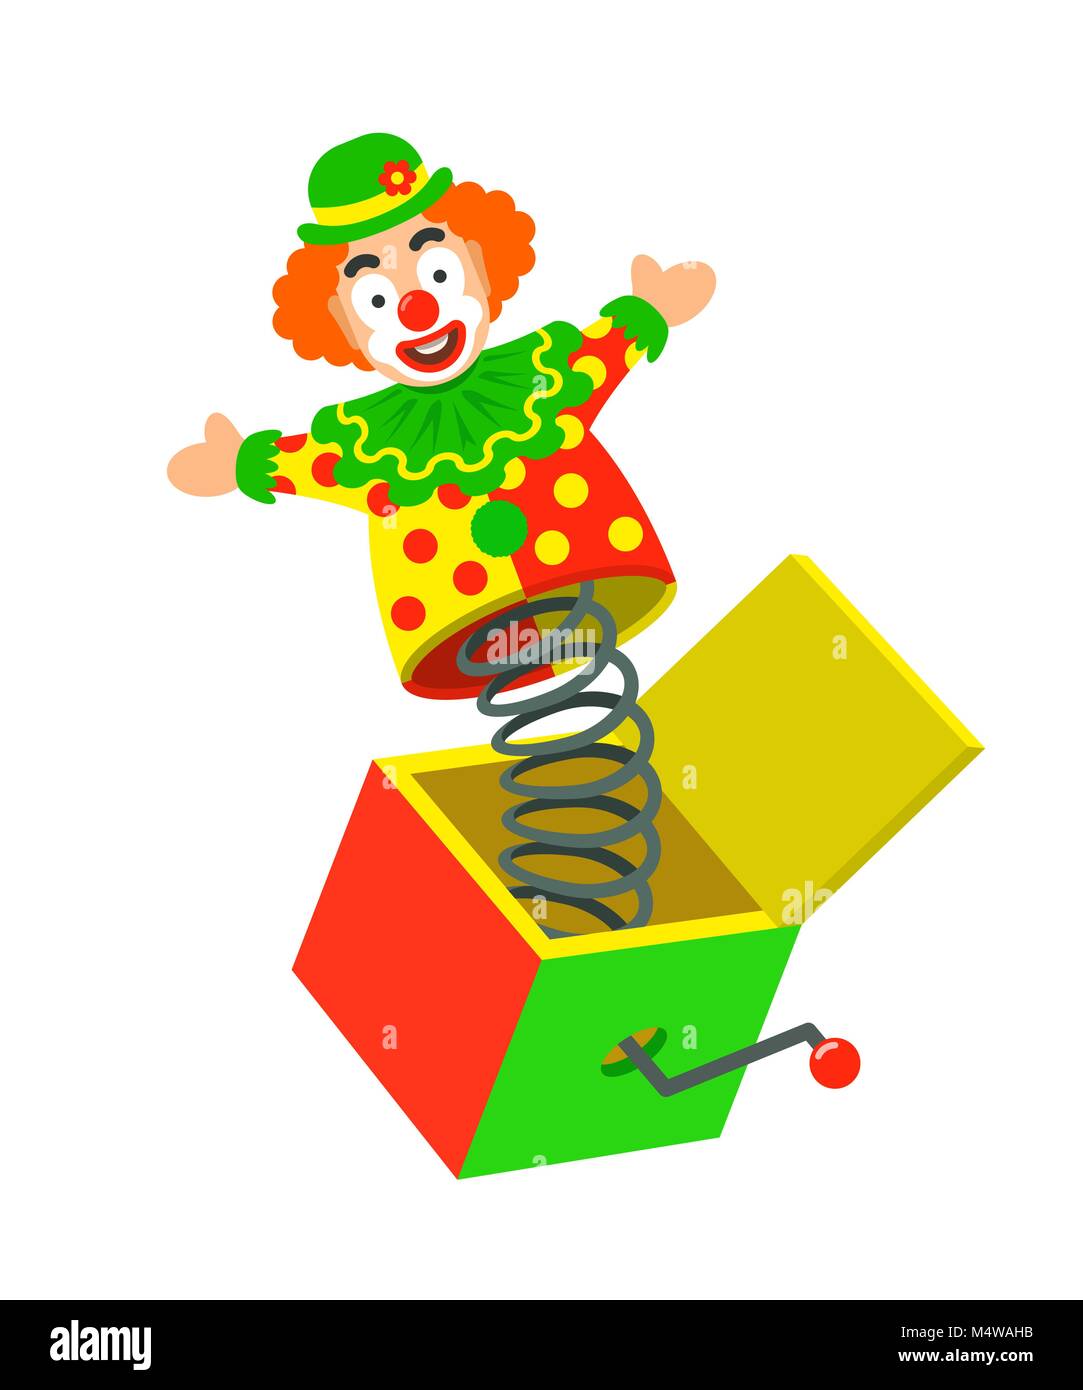 Toy circus clown on a spring pops out of a box. Surprise joke for April Fools day. Jack in a box toy. Vector cartoon illustration Stock Vector